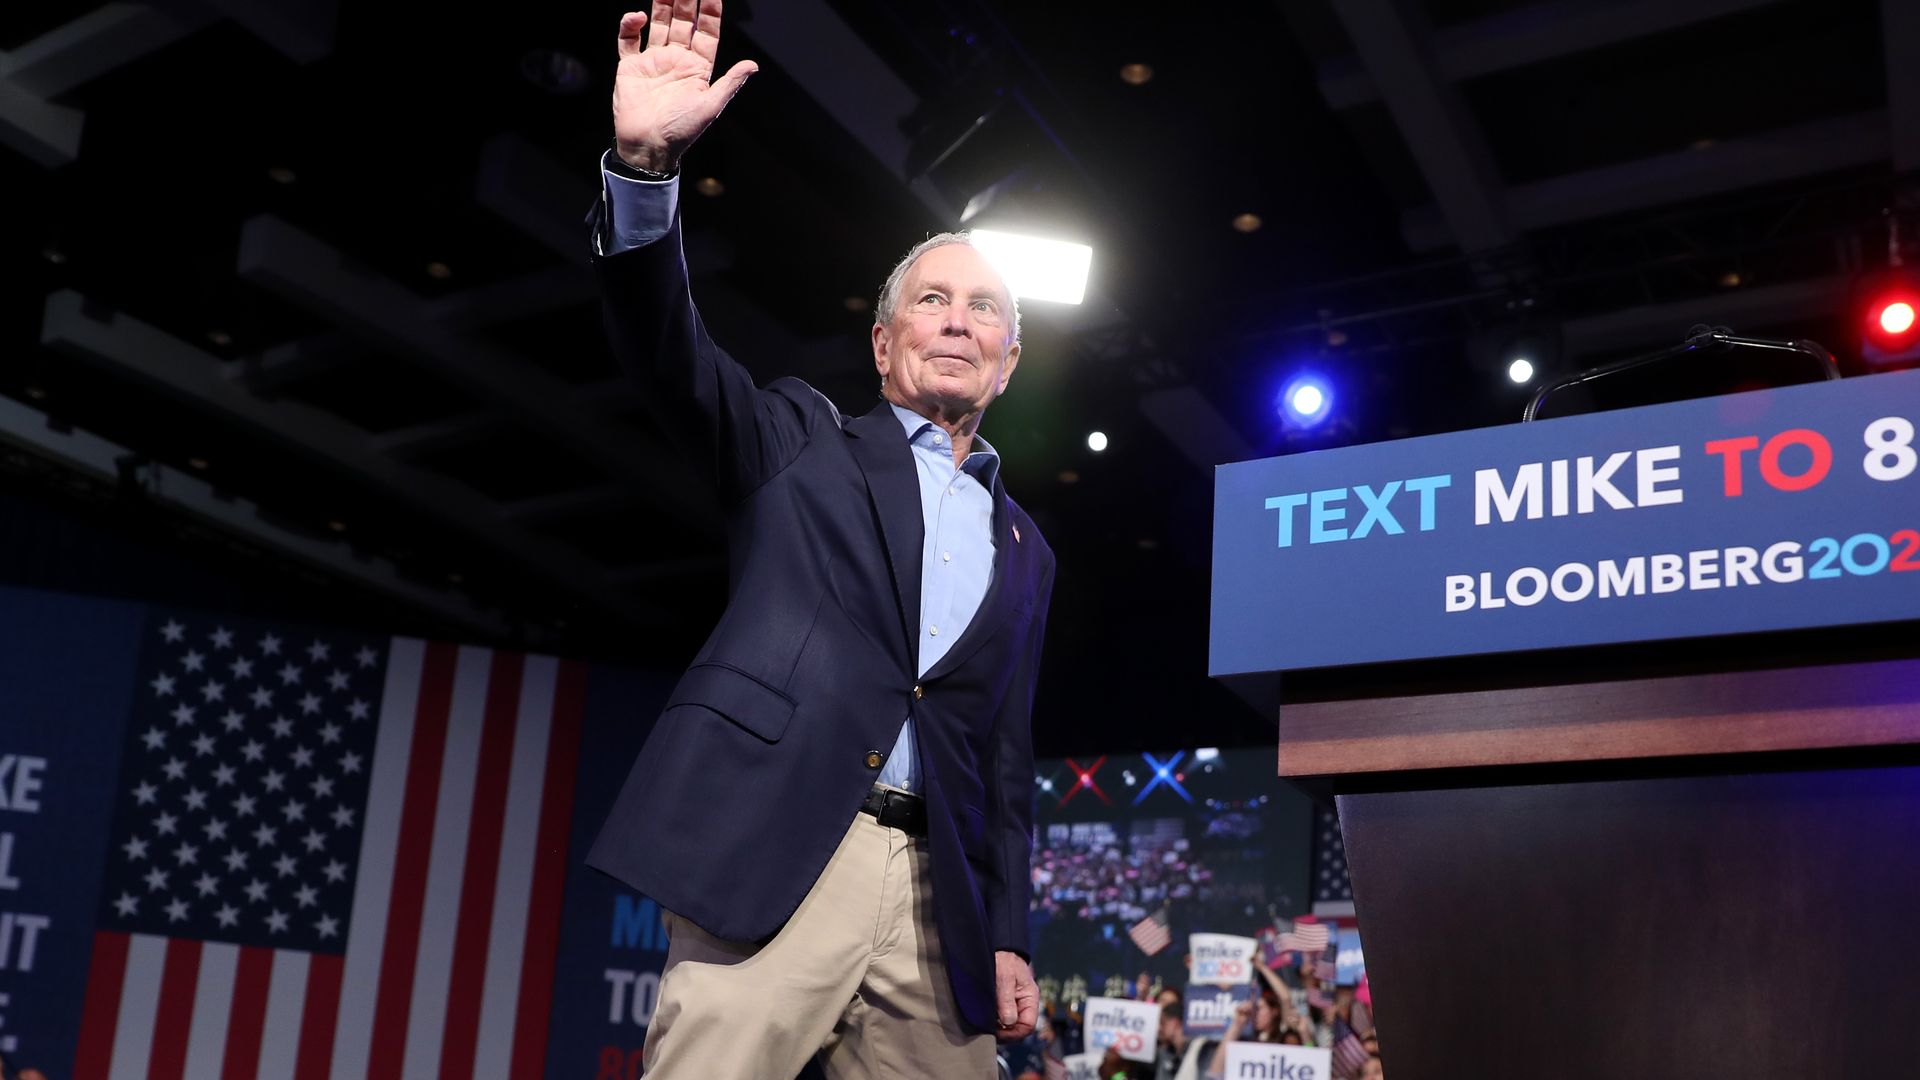 Mike Bloomberg waves to supporters at a rally in Florida